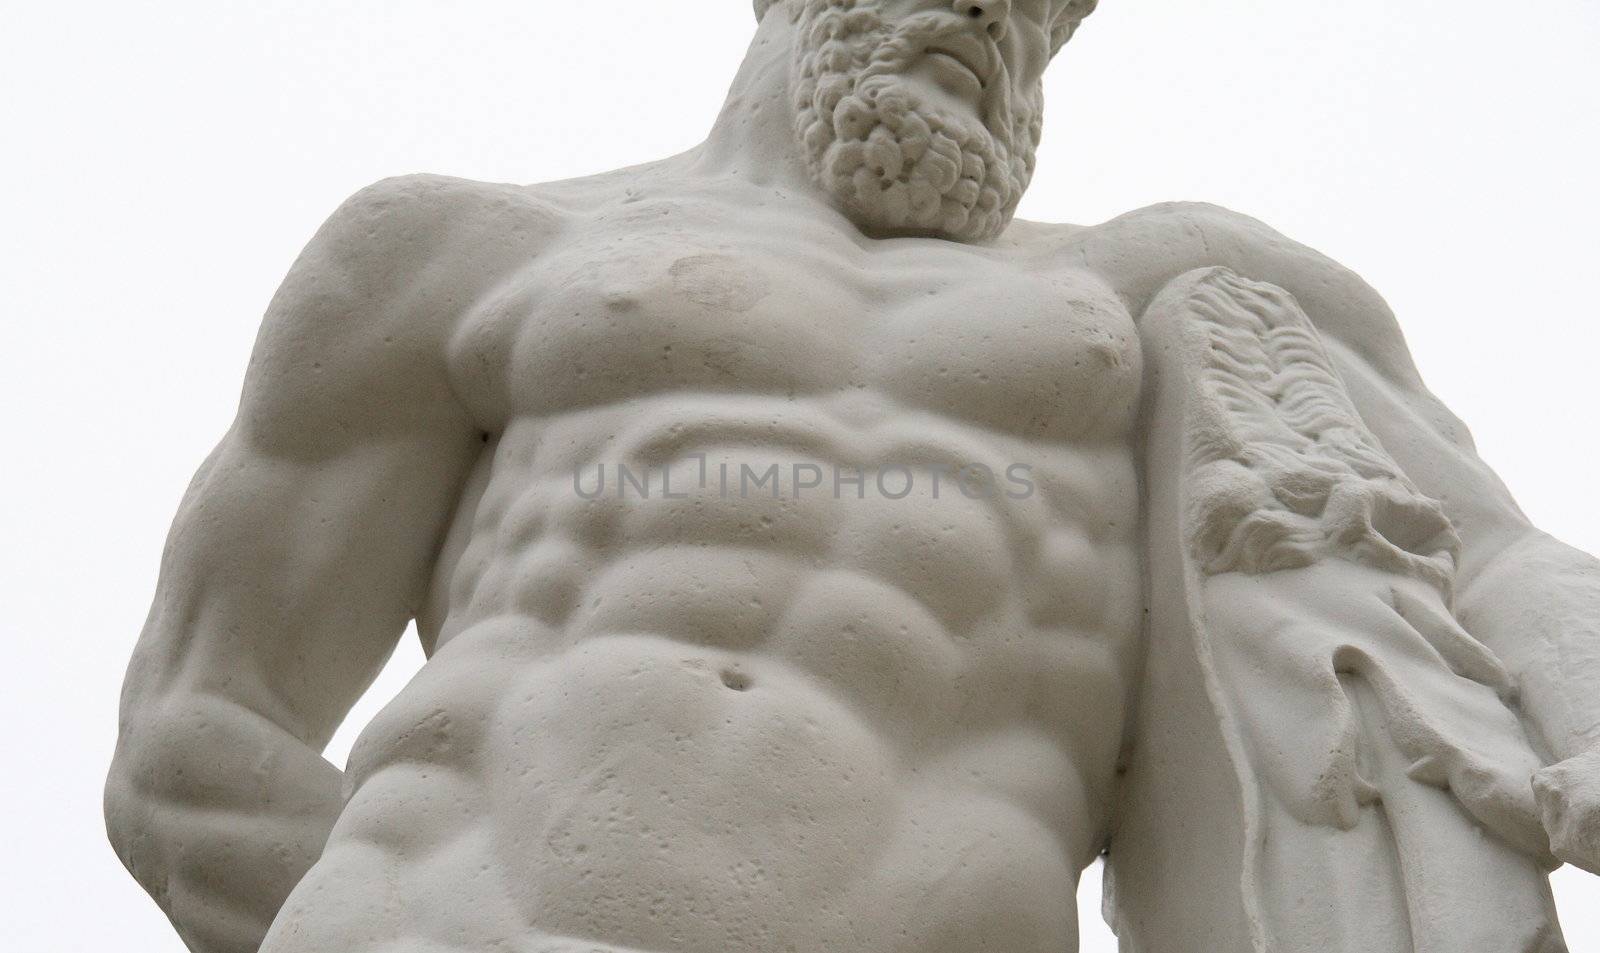 antique statue of a muscular man. Impression of strength and power stressed by the close-up